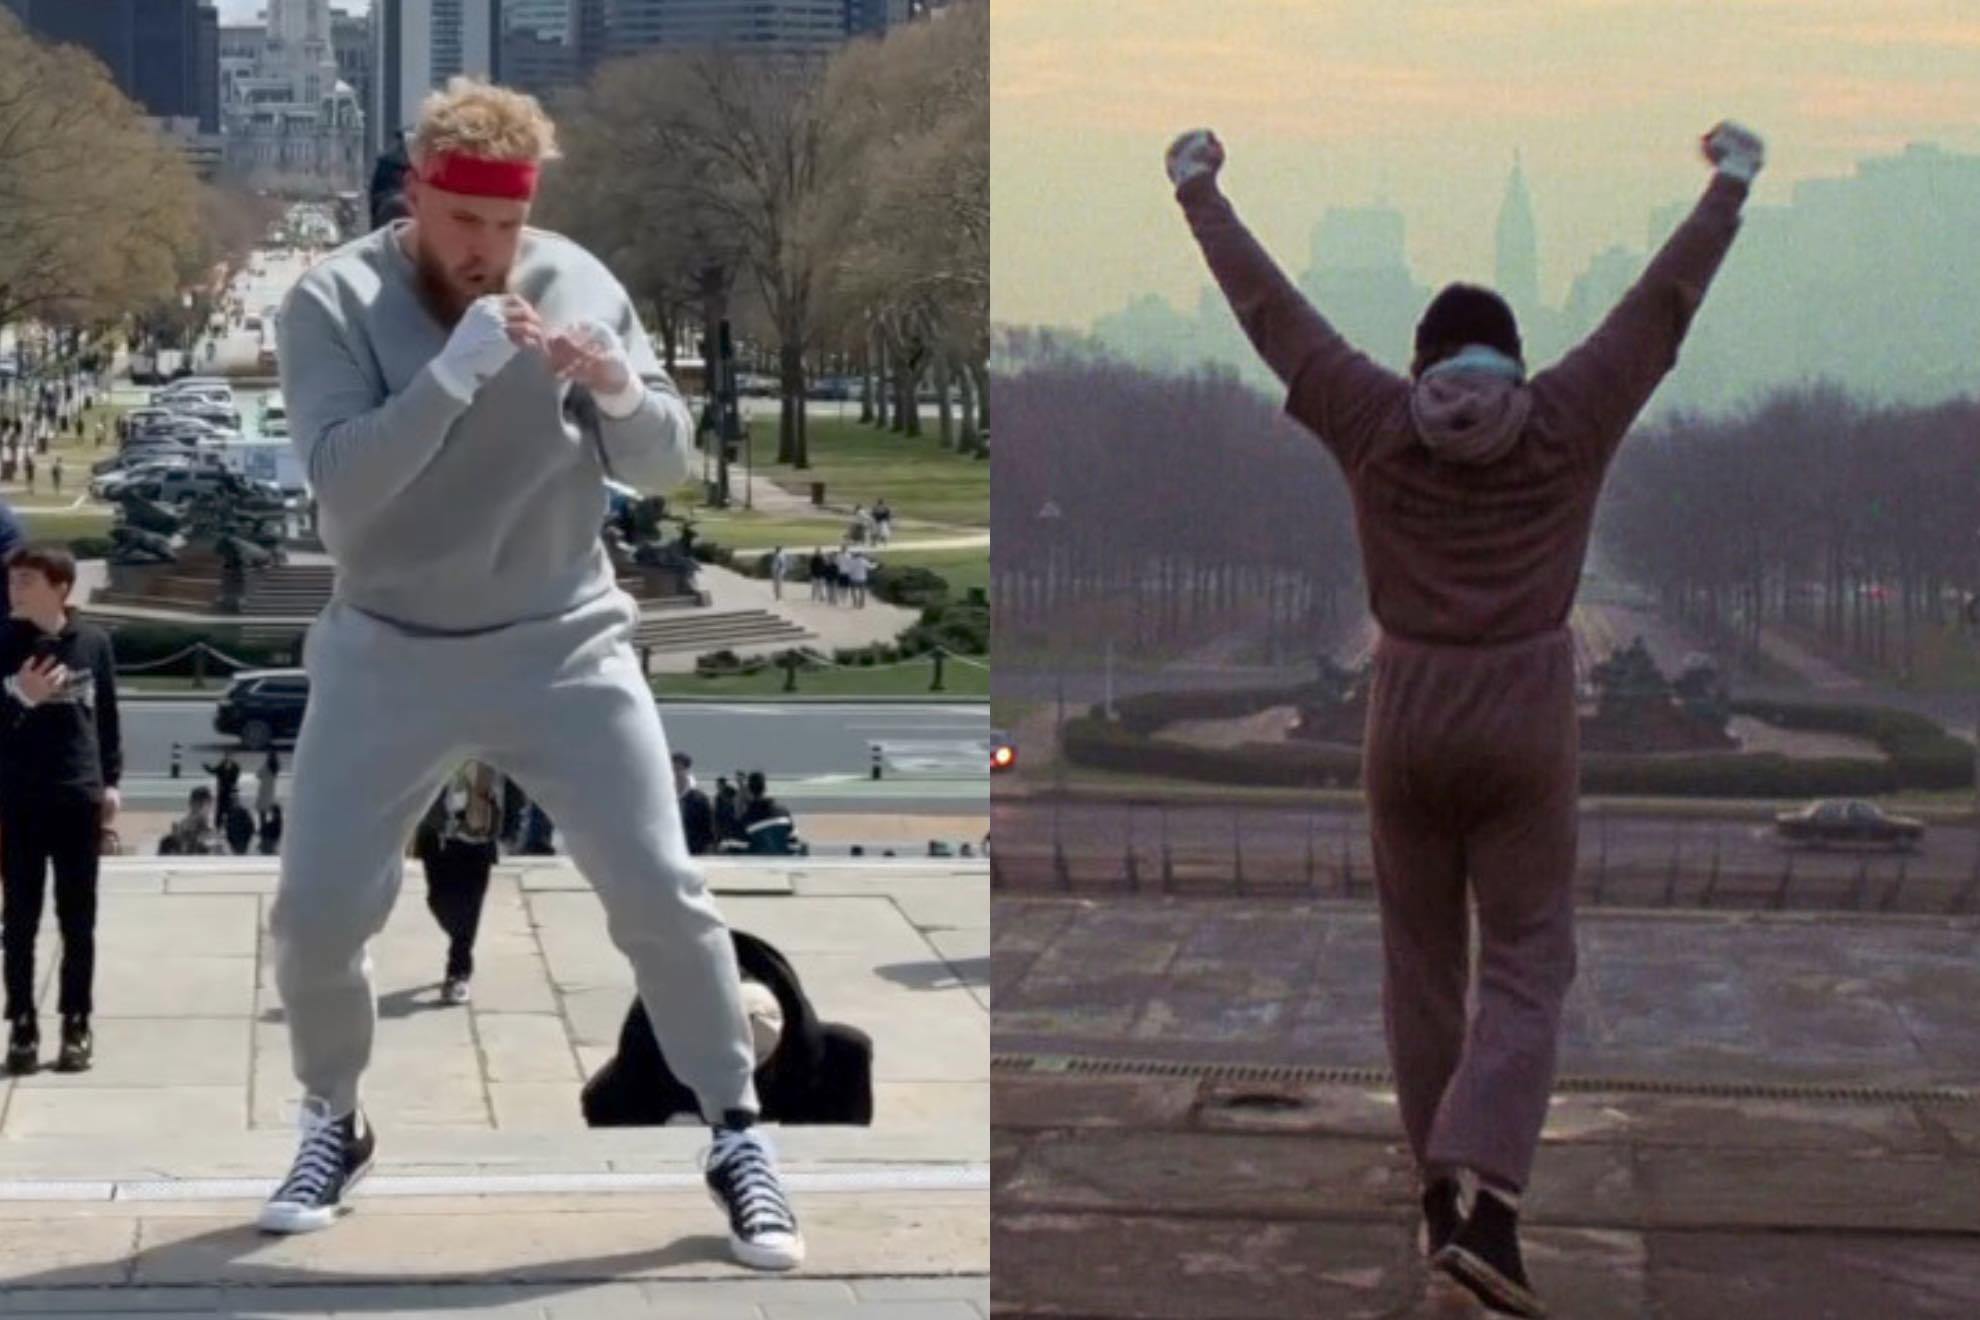 Jake Paul posted his own version of the Rocky training montage video